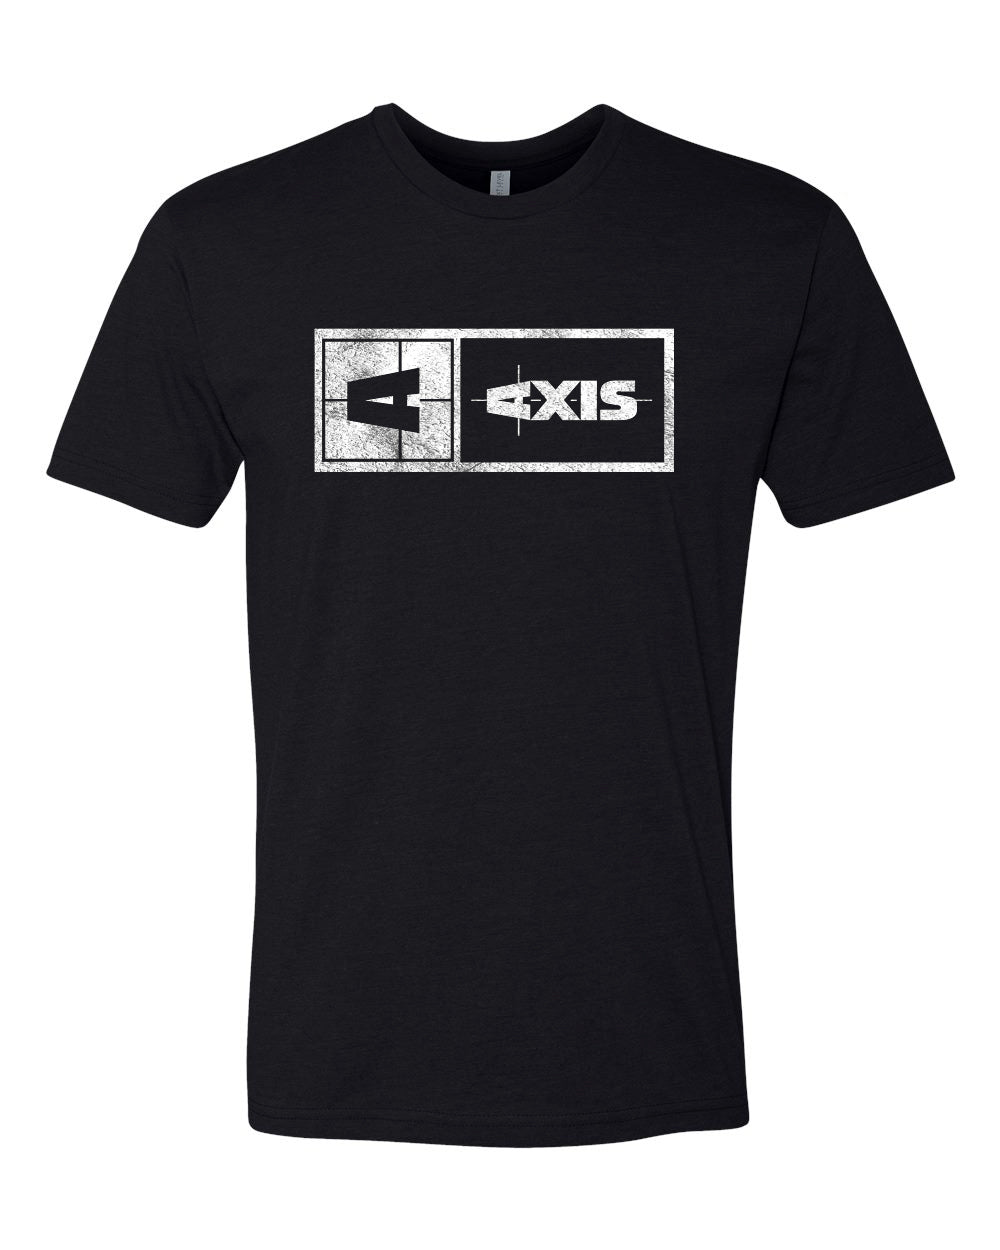 Axis Statement Tee